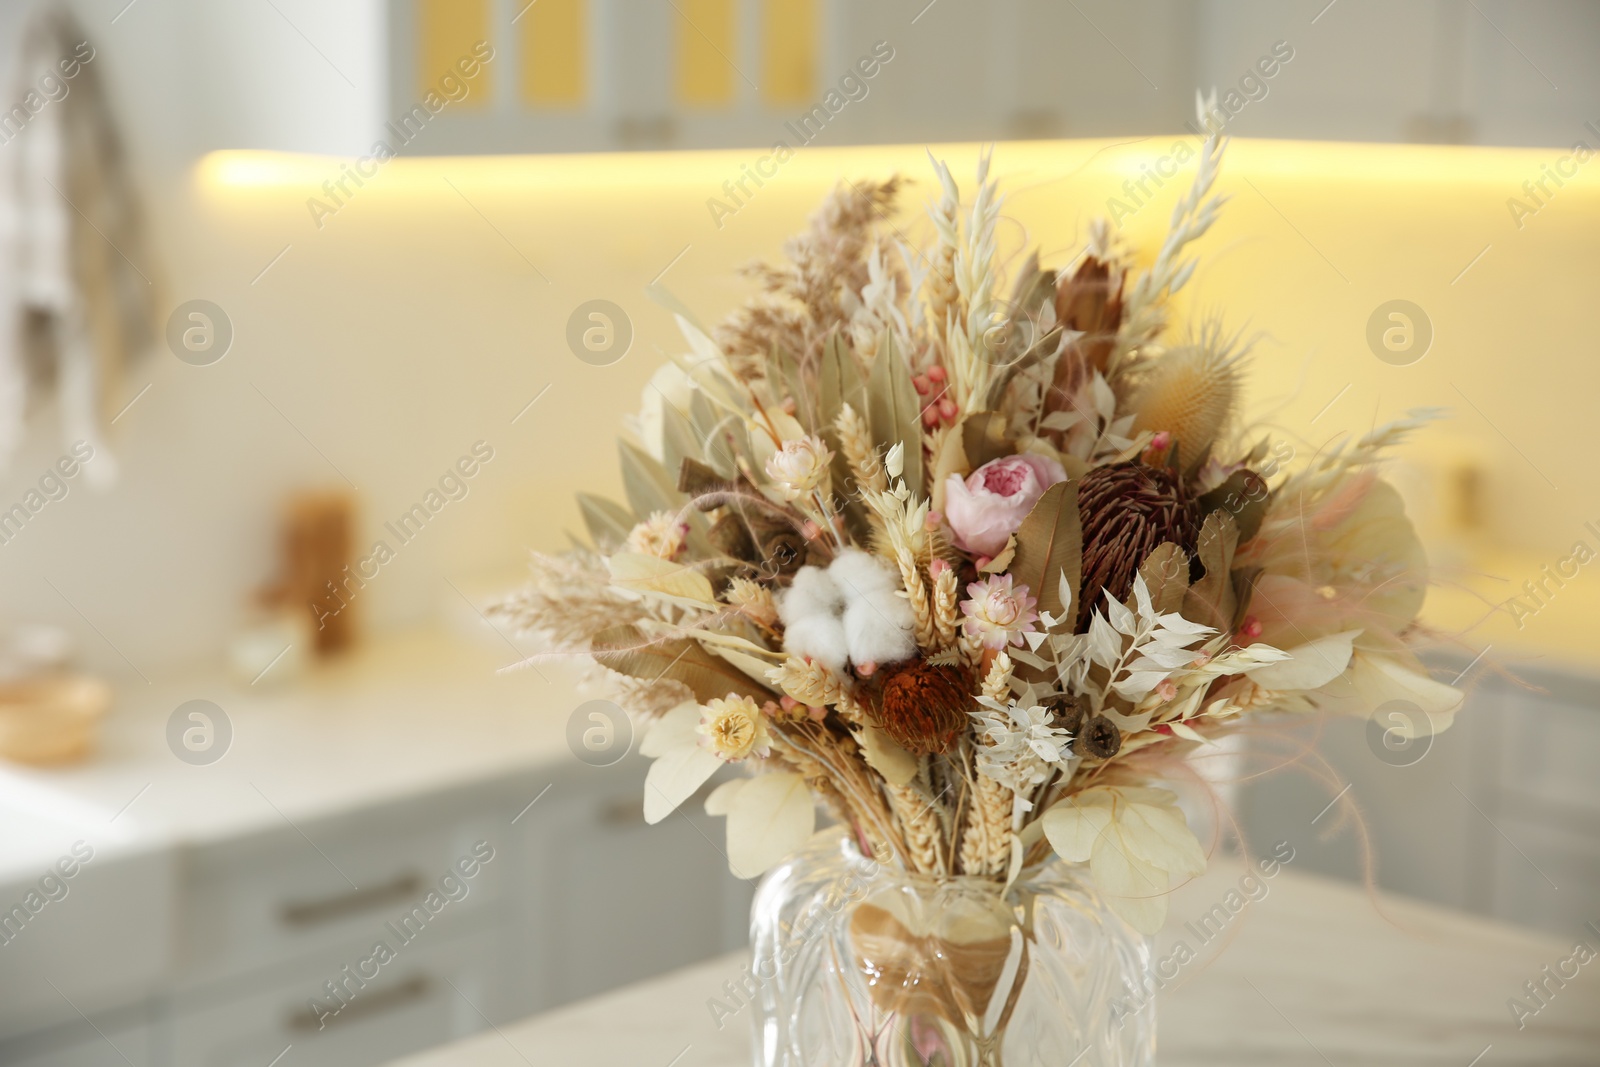 Photo of Bouquet of dry flowers and leaves on table in kitchen